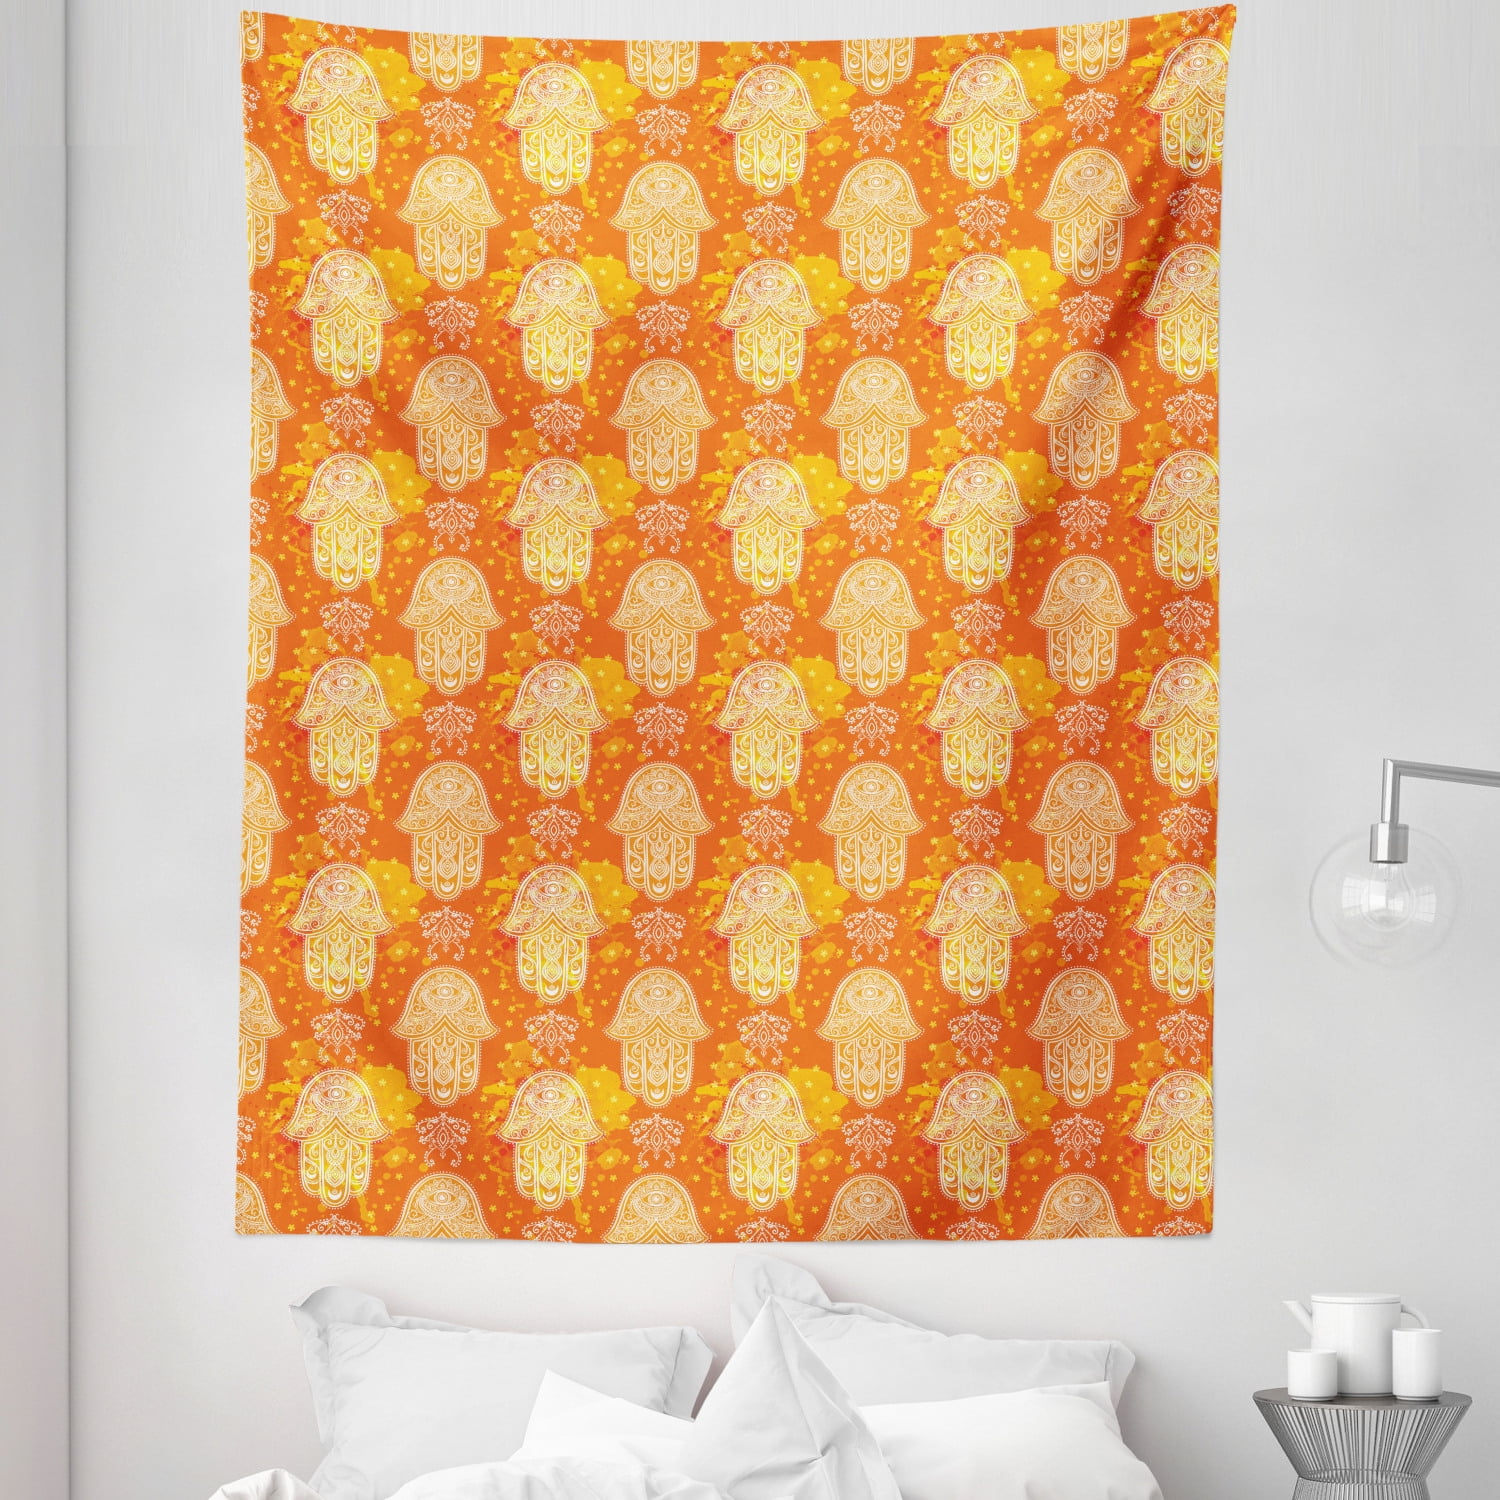 Tapestry Posters Small Wall Hanging Throw Home Decor Orange Cotton Indian Hippie 